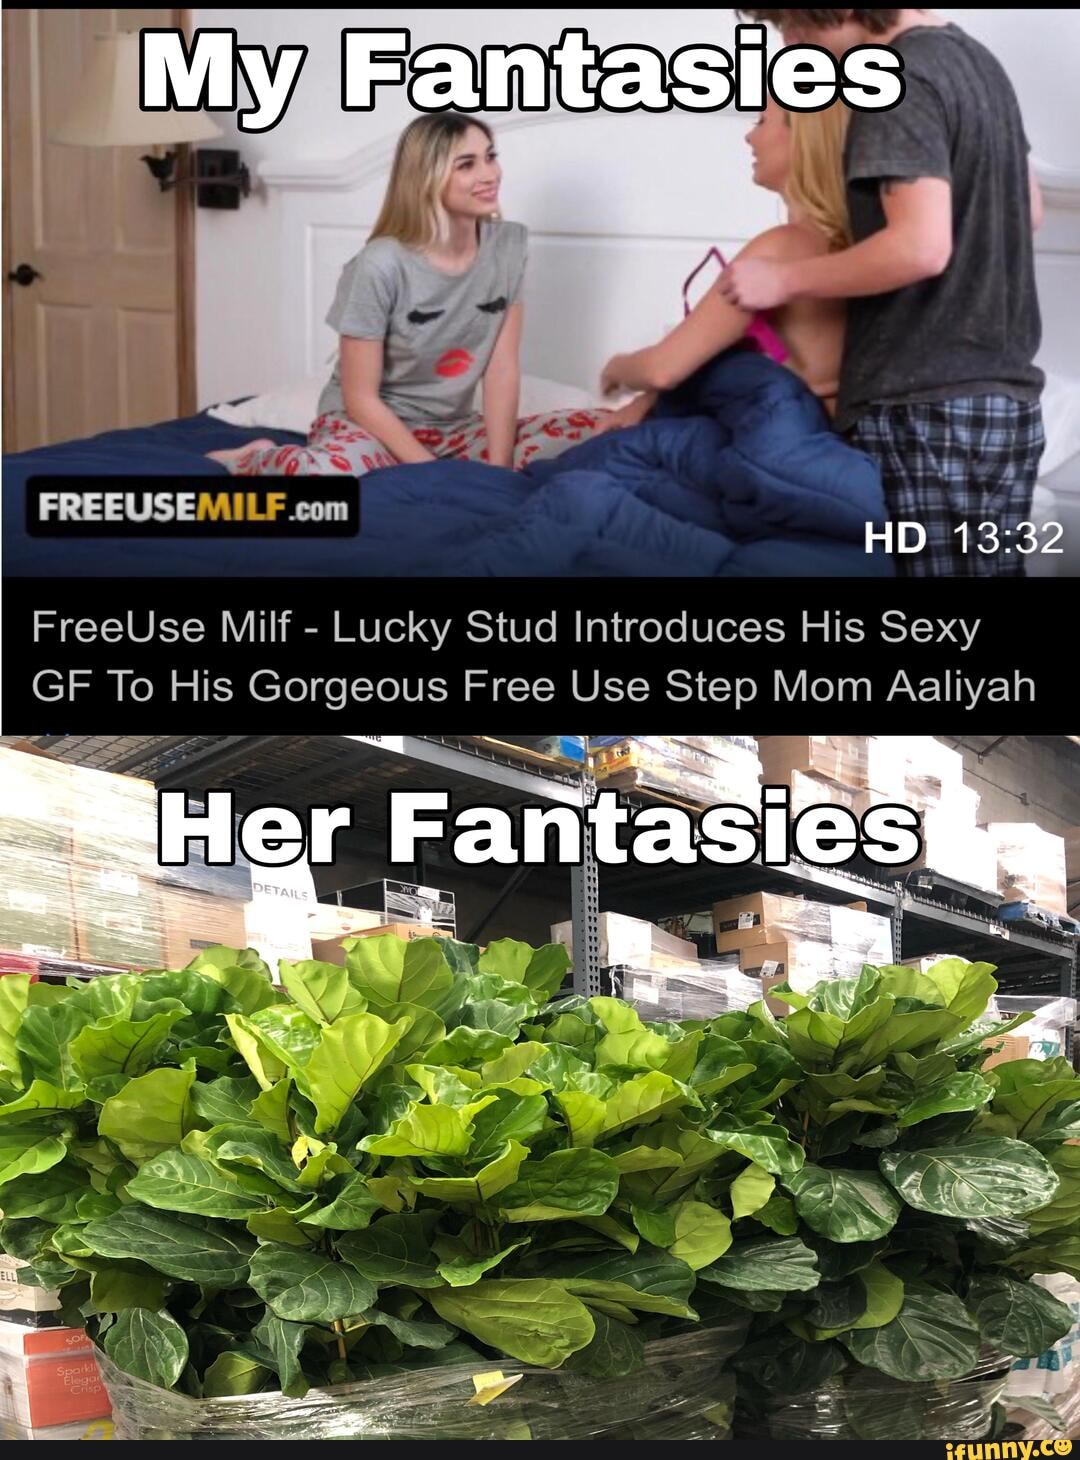 My Fantasies Freeusemilf Ad Freeuse Milf Lucky Stud Introduces His Sexy Gf To His Gorgeous